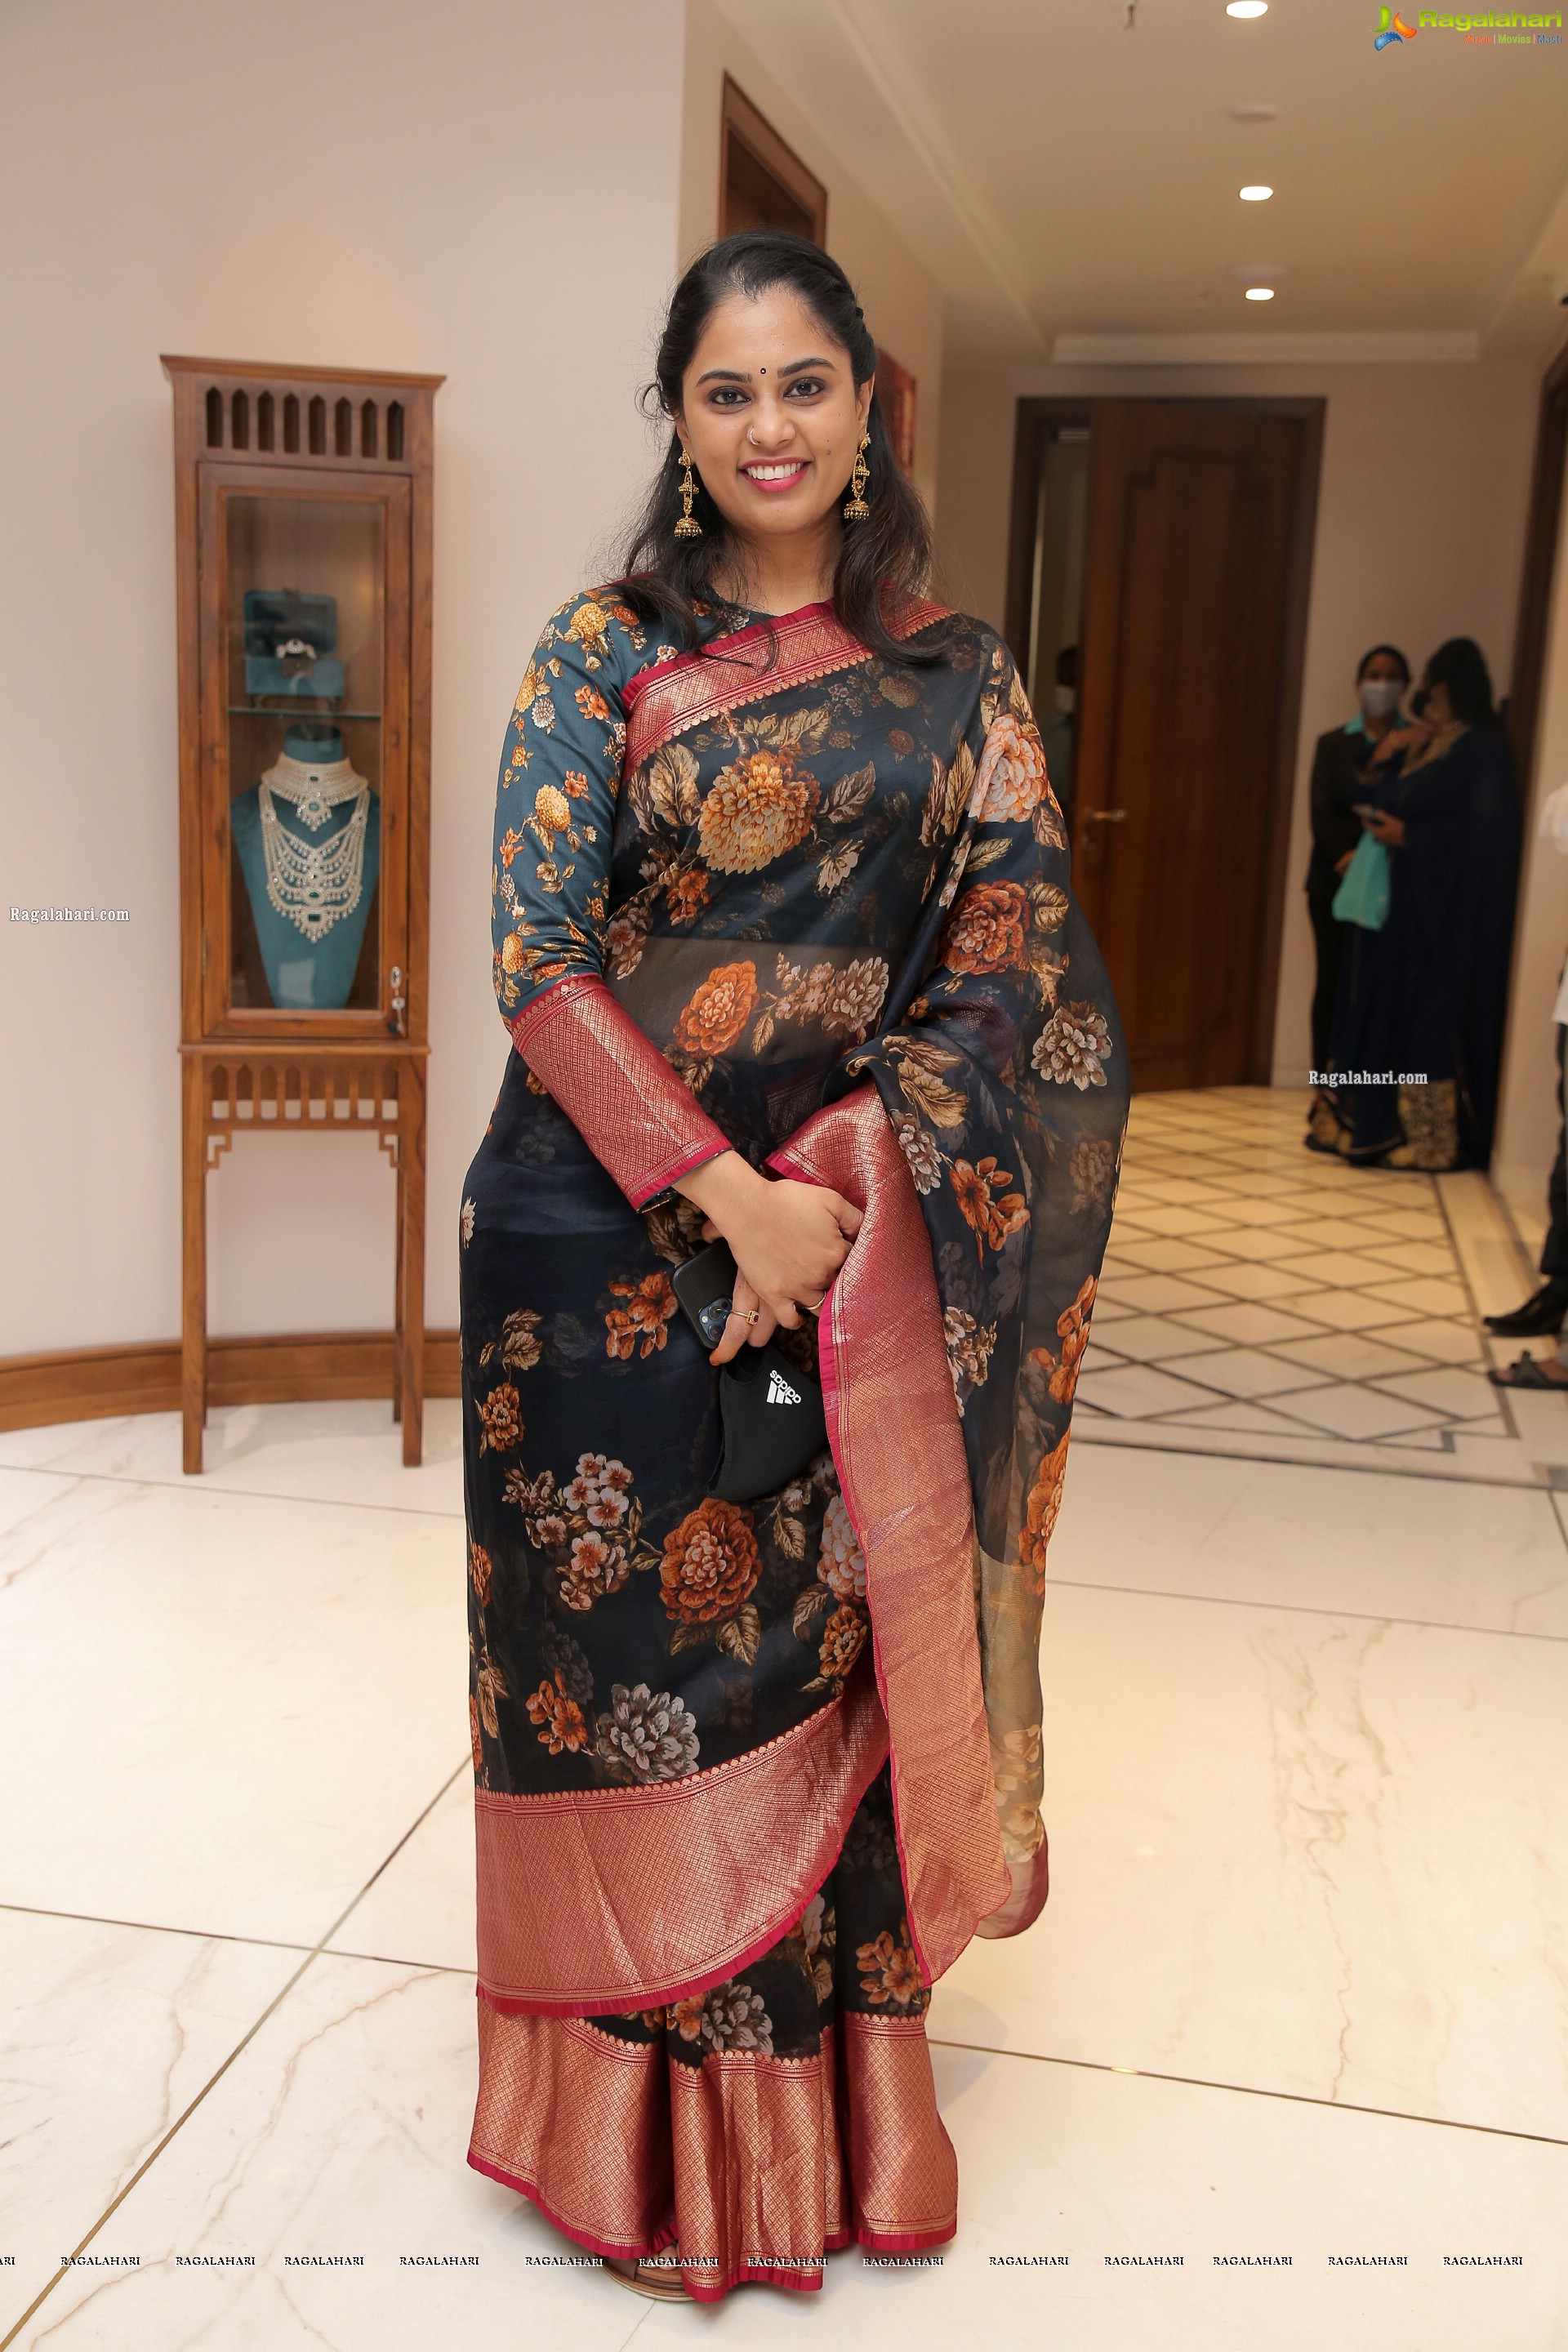 PV Sindhu Inaugurates Vasundhara, an Exclusive and Flagship Jewellery Store at Jubilee Hills, Hyderabad